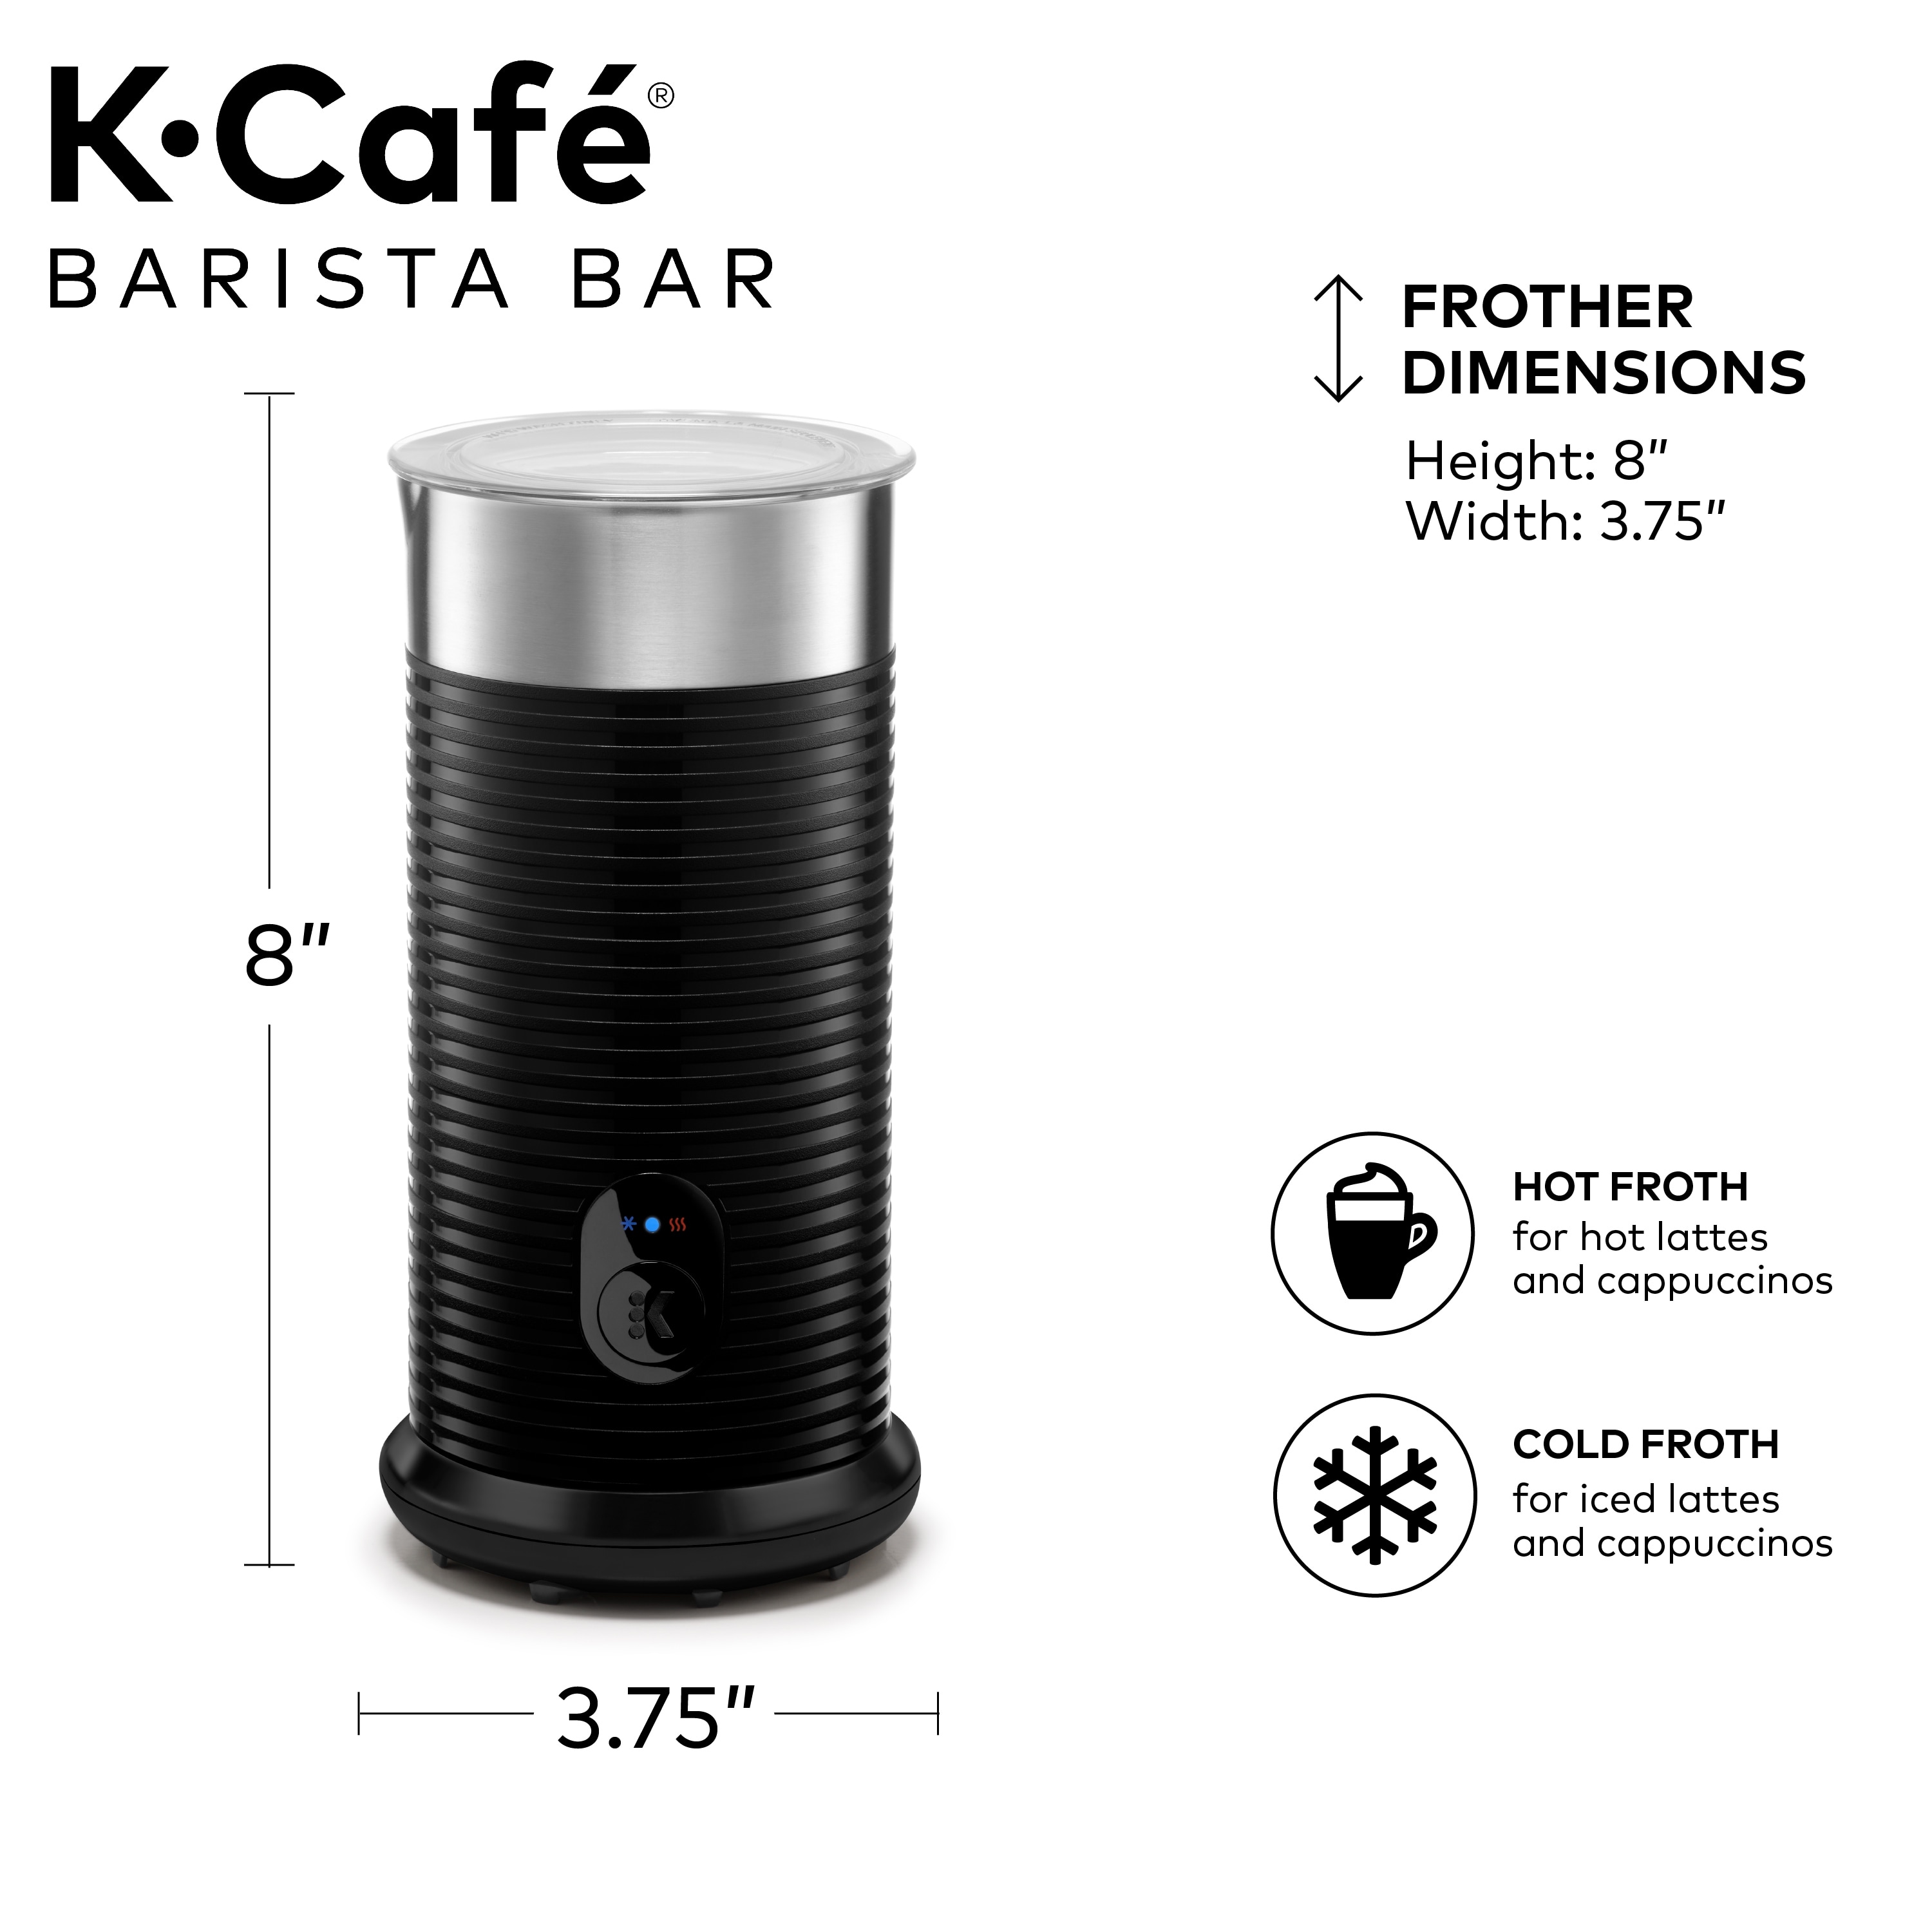 https://ak1.ostkcdn.com/images/products/is/images/direct/afb63c1f6a5ccbff36aa90215f0dbaadf4e87747/Keurig%C2%AE-K-Caf%C3%A9-Barista-Bar-Single-Serve-Coffee-Maker-and-Frother.jpg